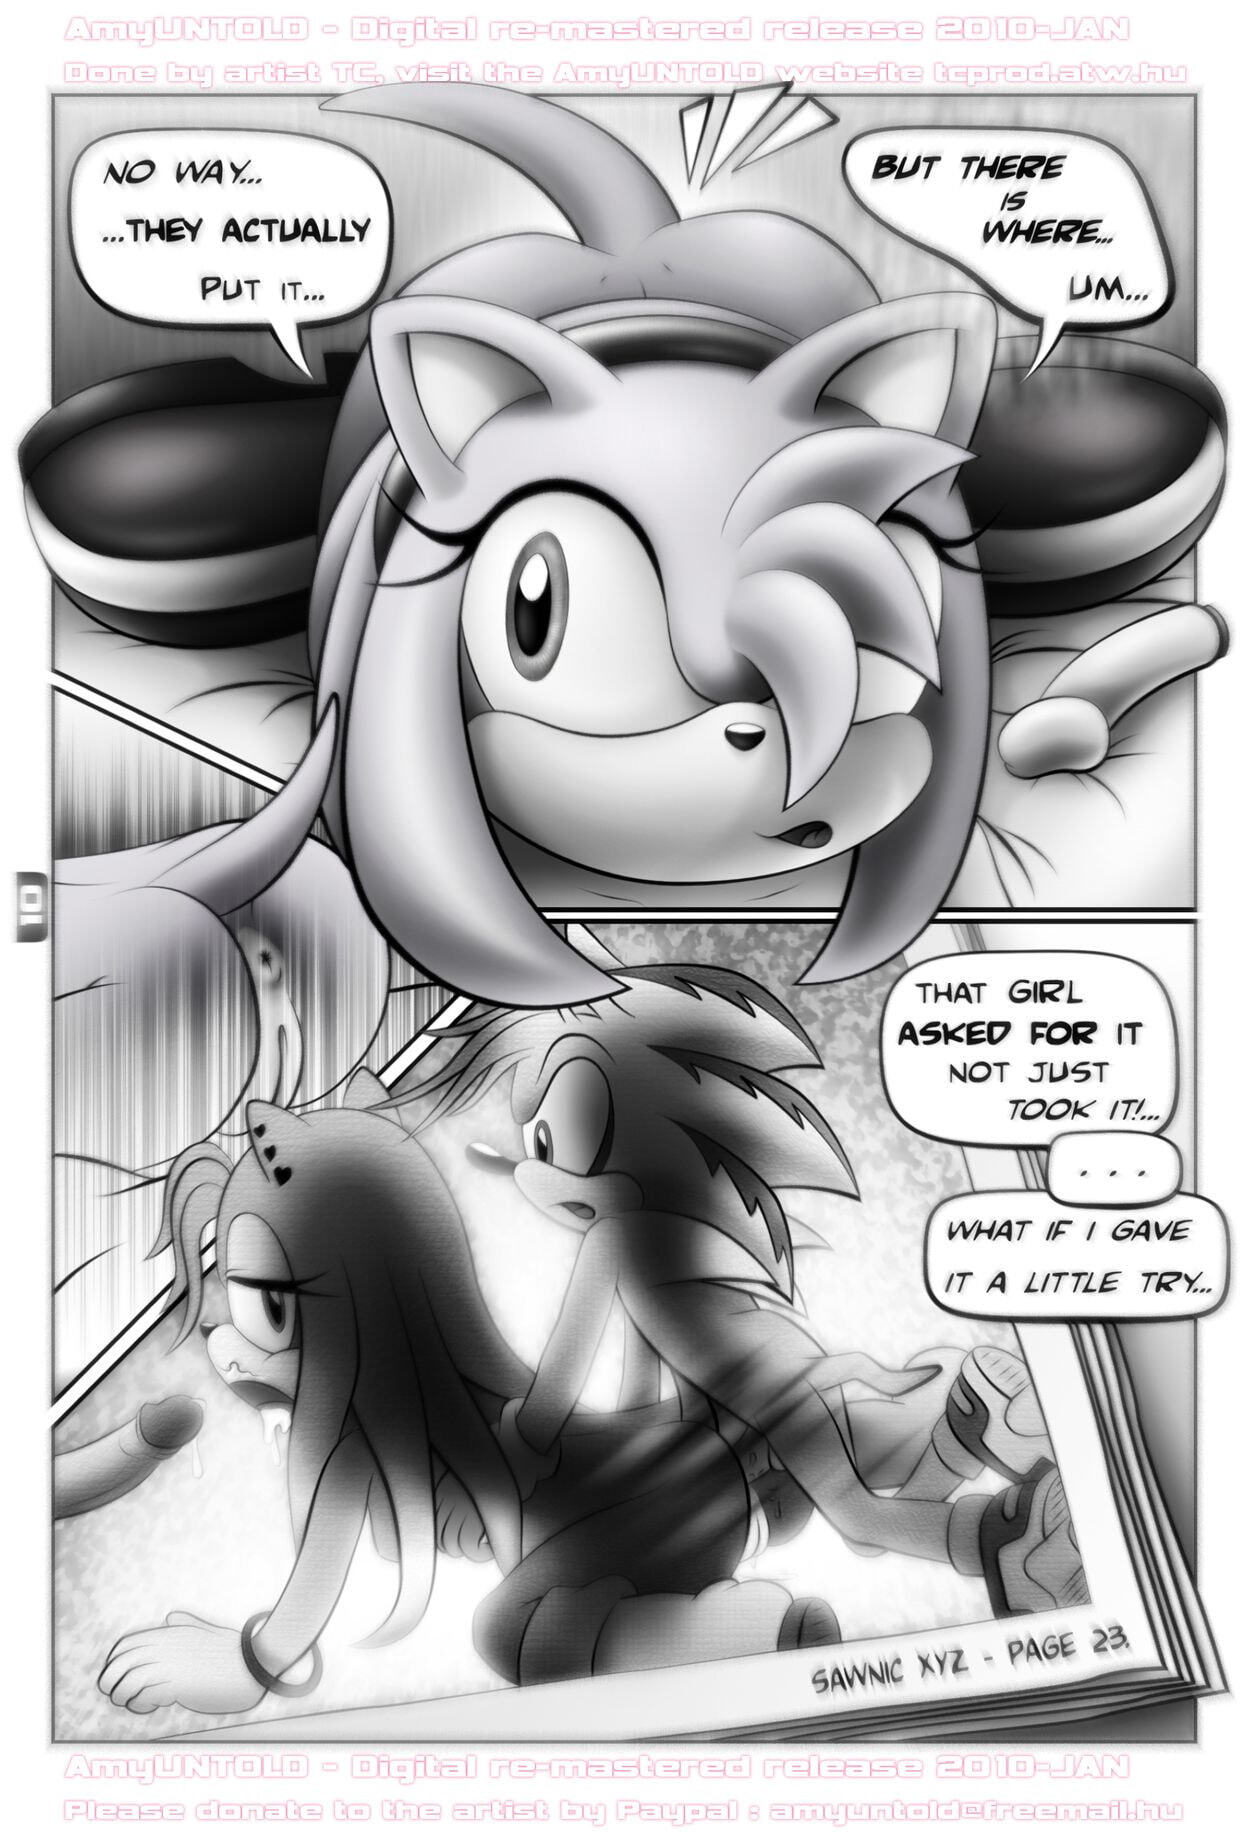 Amy Untold - Finally - Page 10